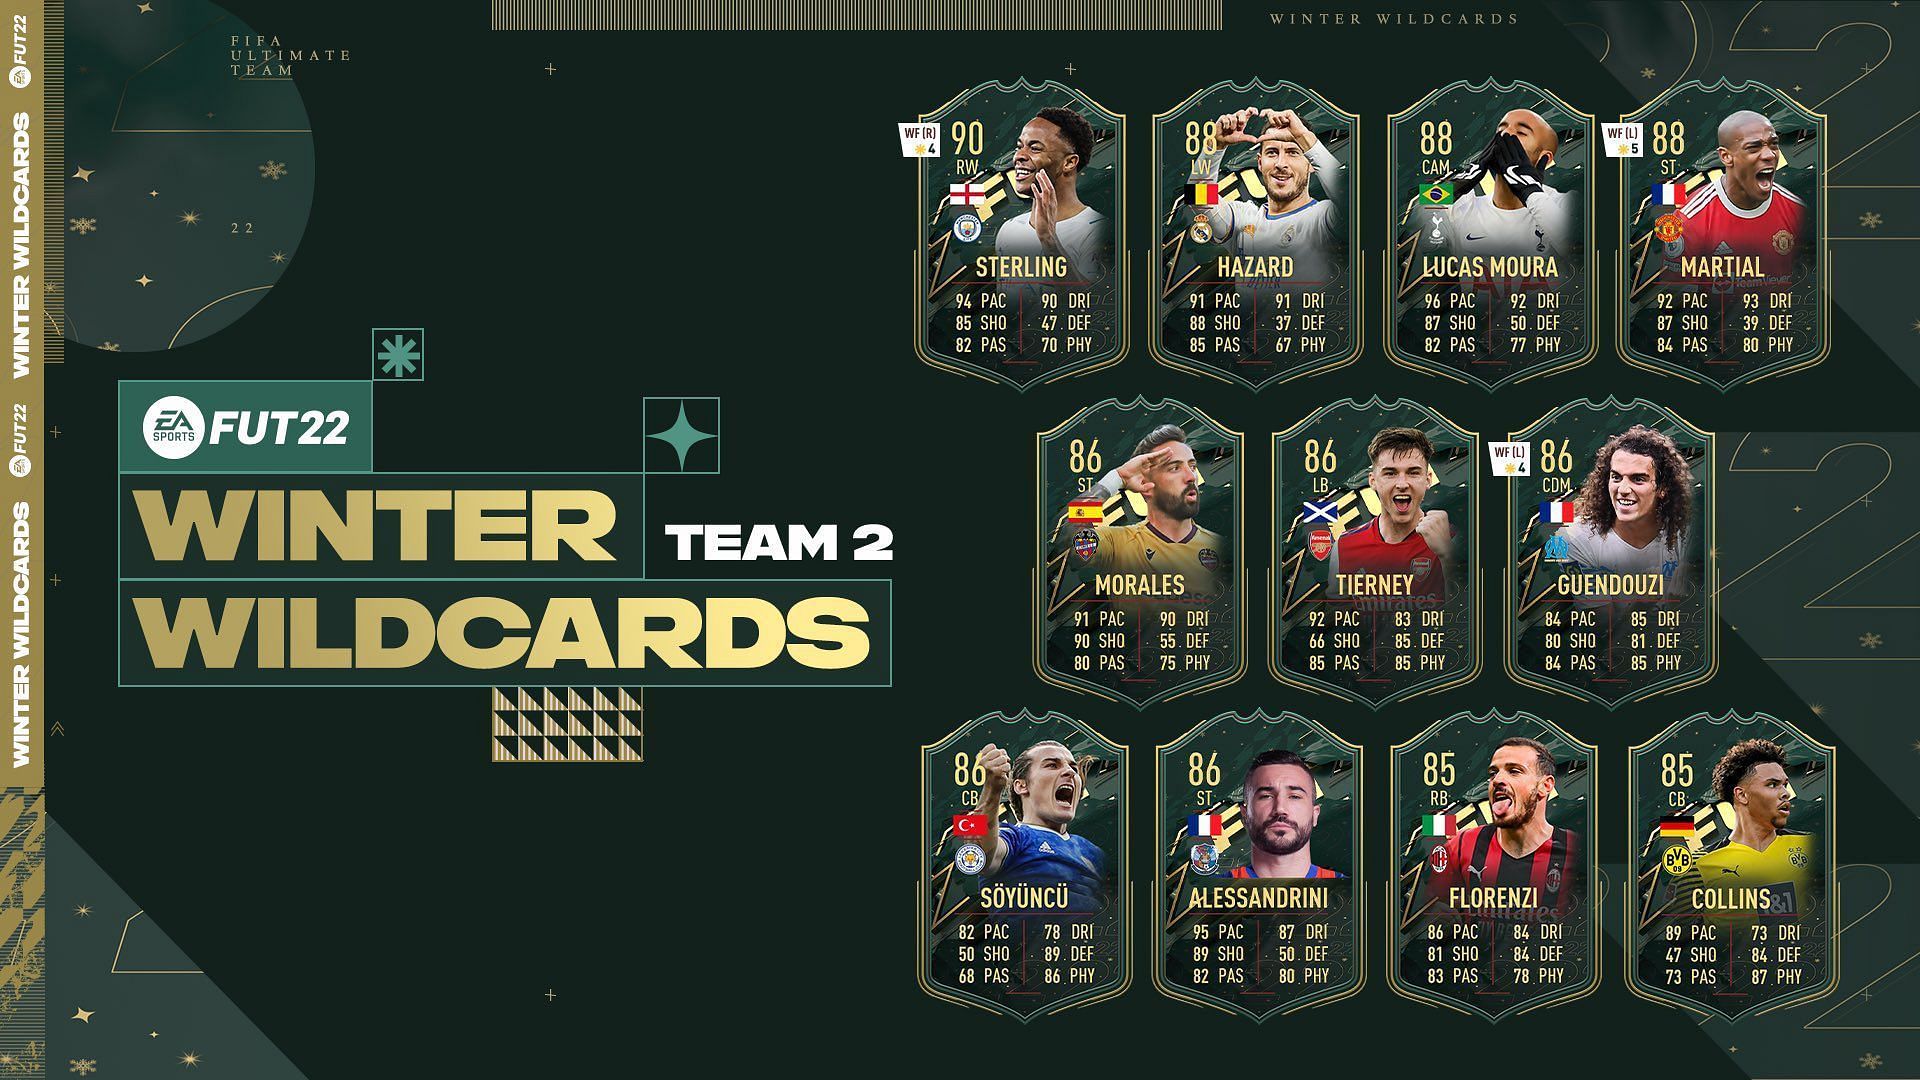 FIFA 22 Ultimate Team Full list and best cards of the Winter Wildcards